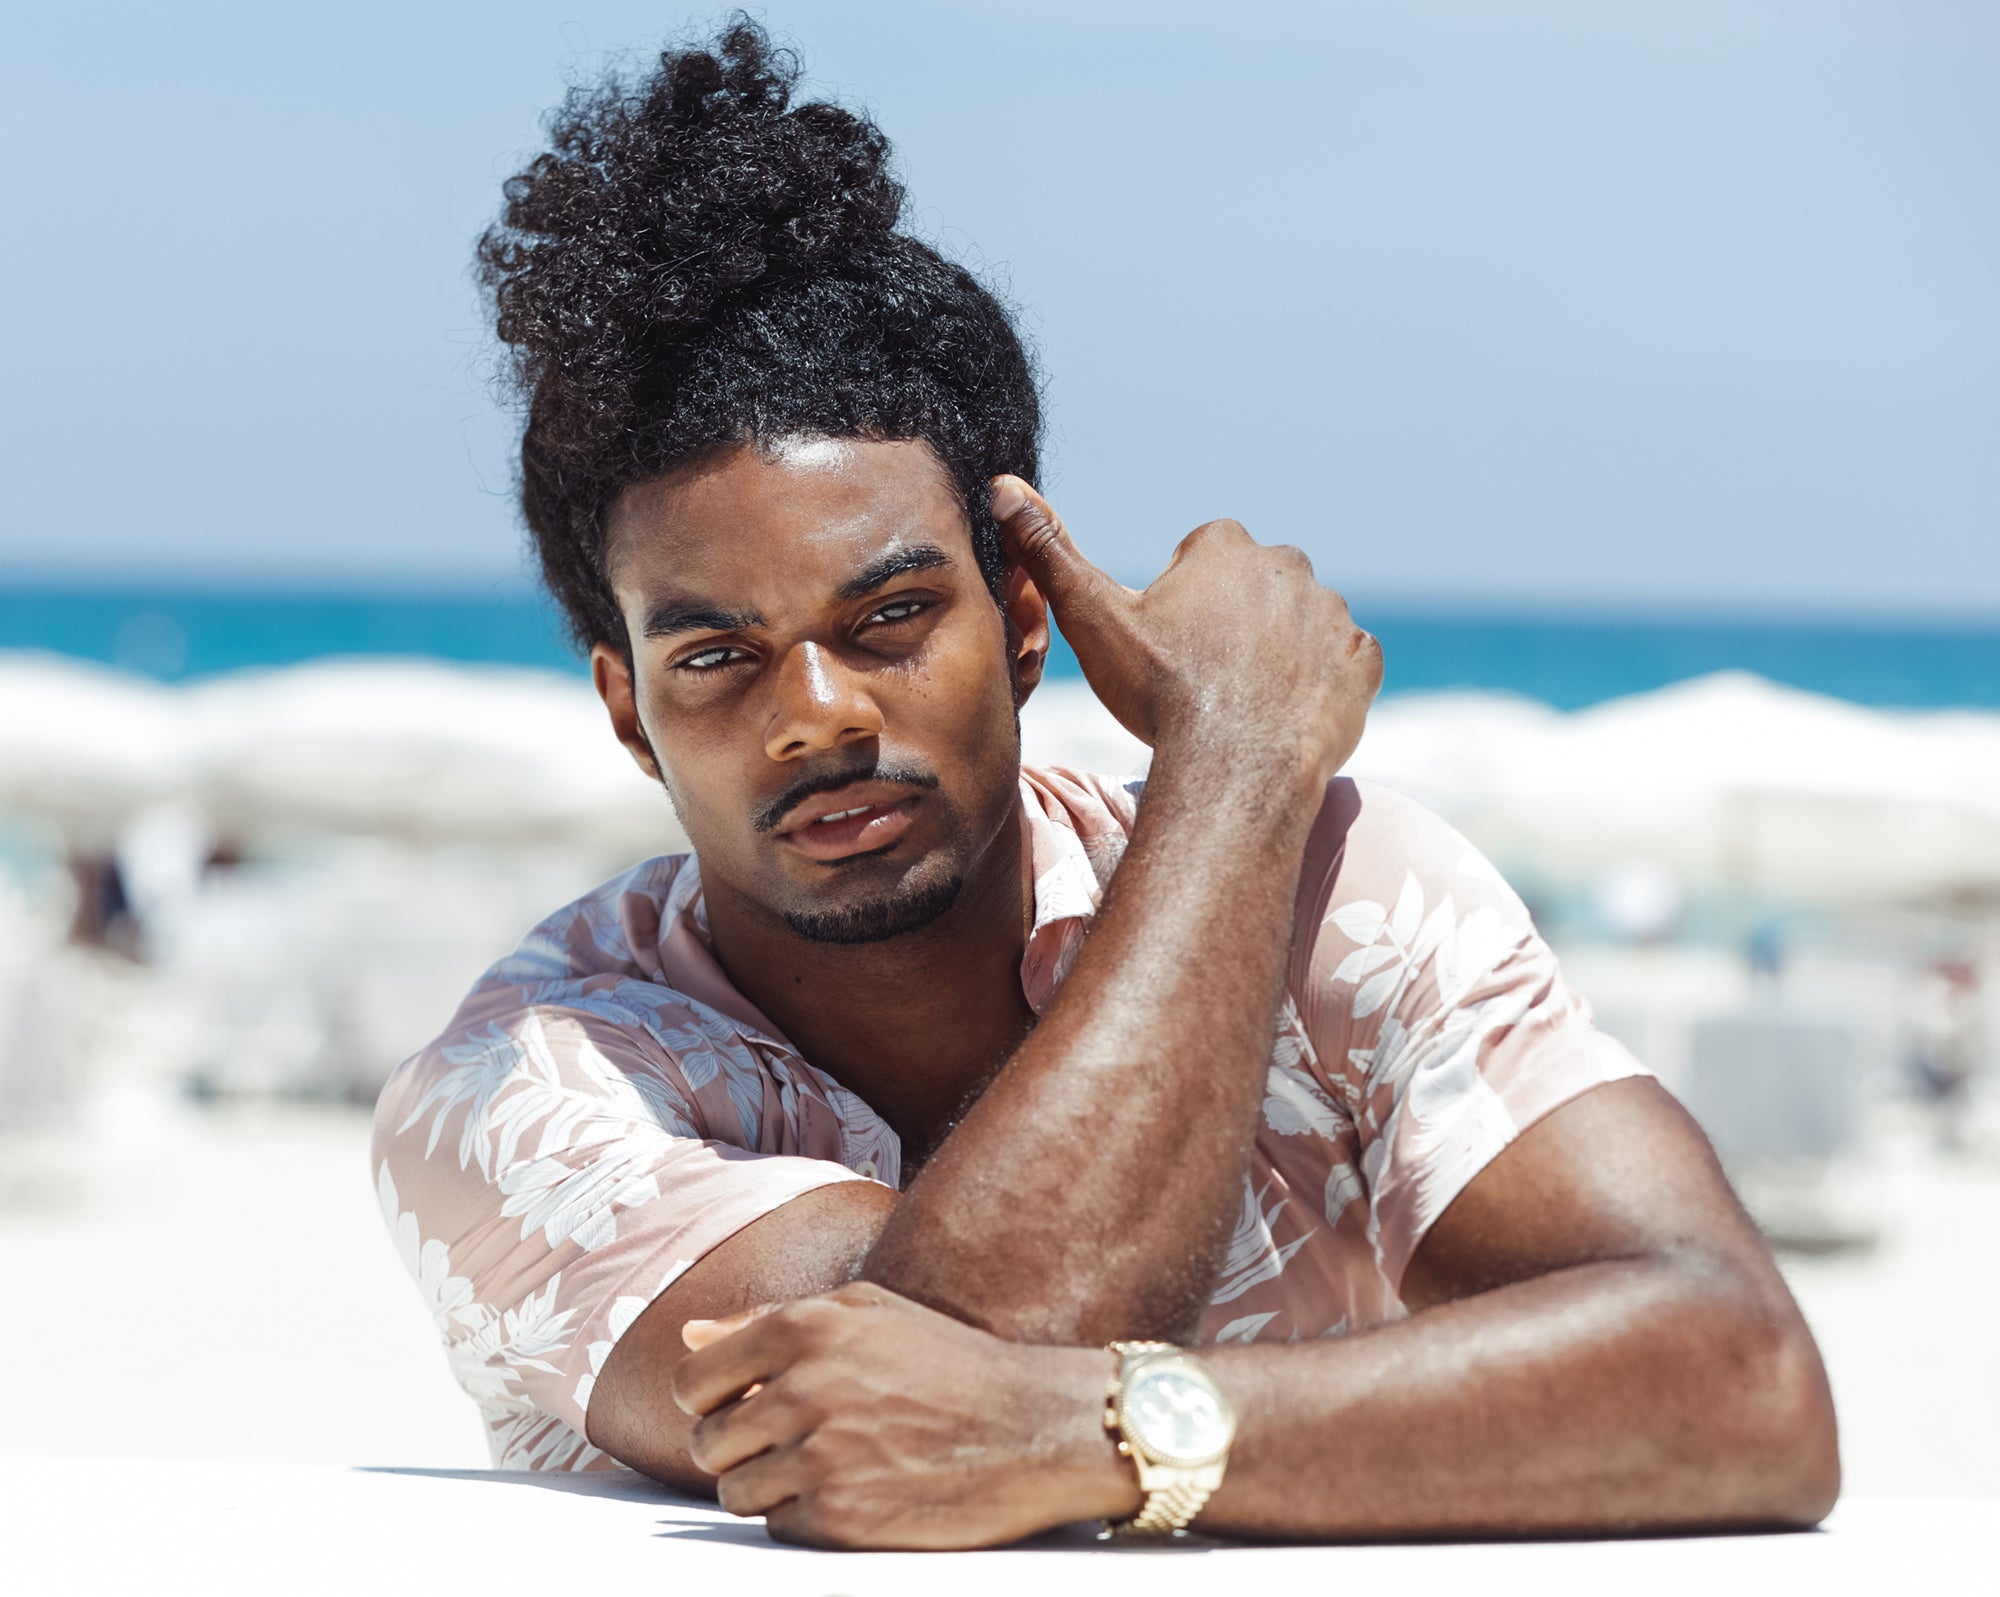 MCM: You’ll Want To Run Your Fingers Through Model Aaron Spady’s Hair